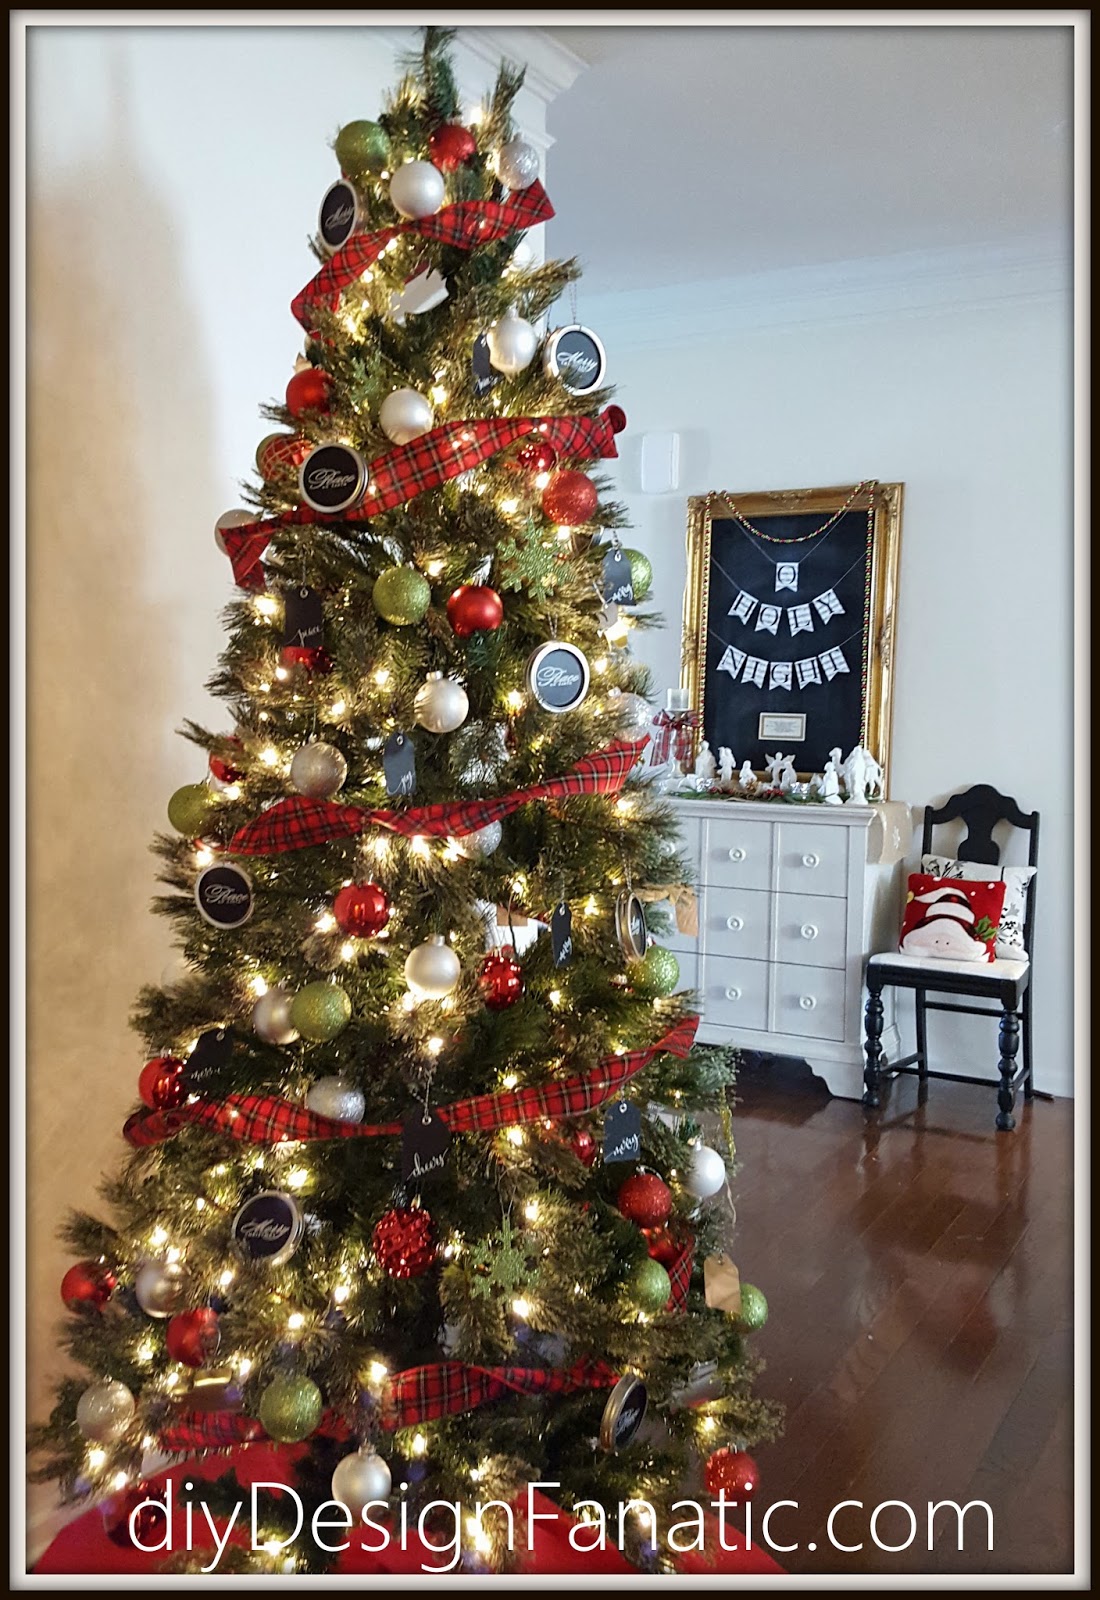 diy Design Fanatic: 'Twas A Week Before Christmas And All Through The ...